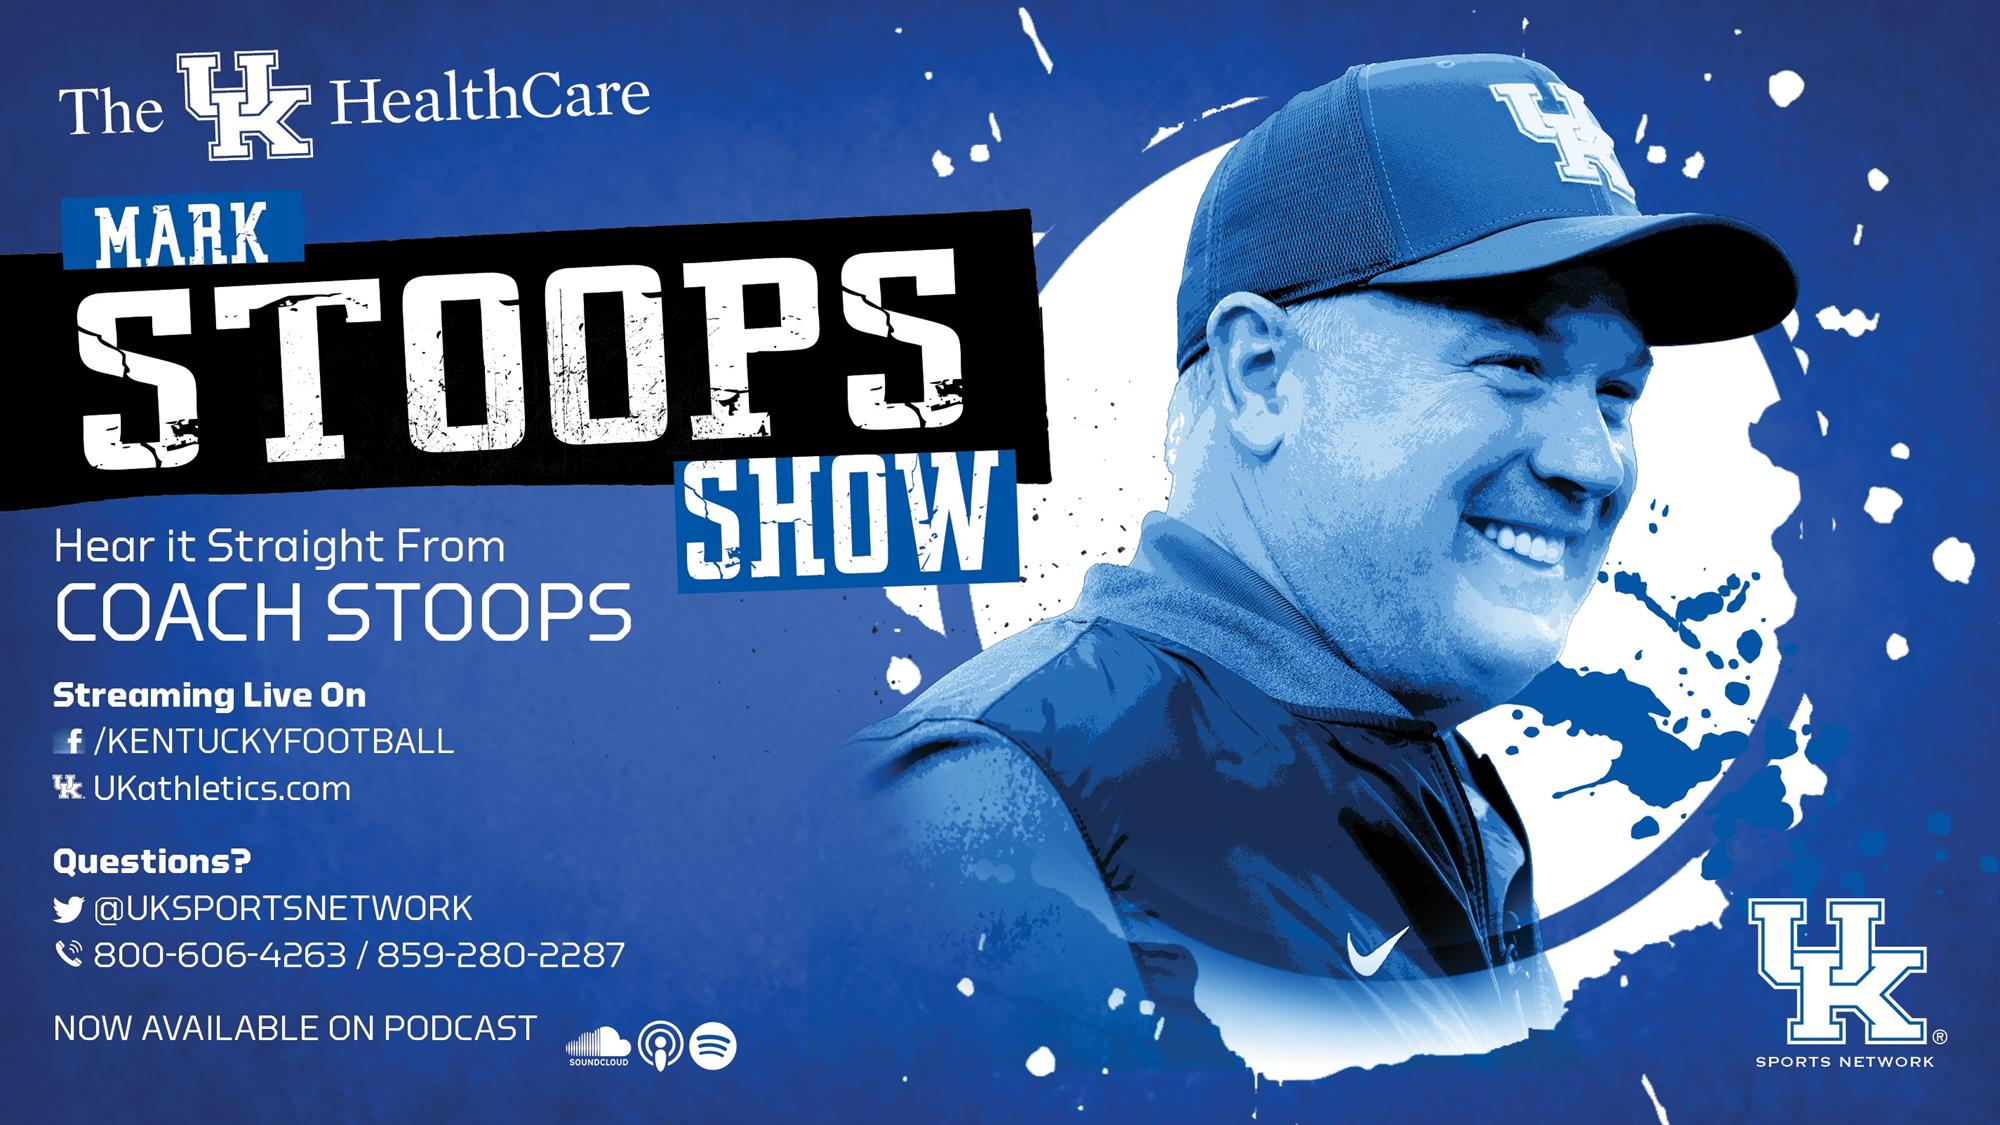 UK HealthCare Mark Stoops Show